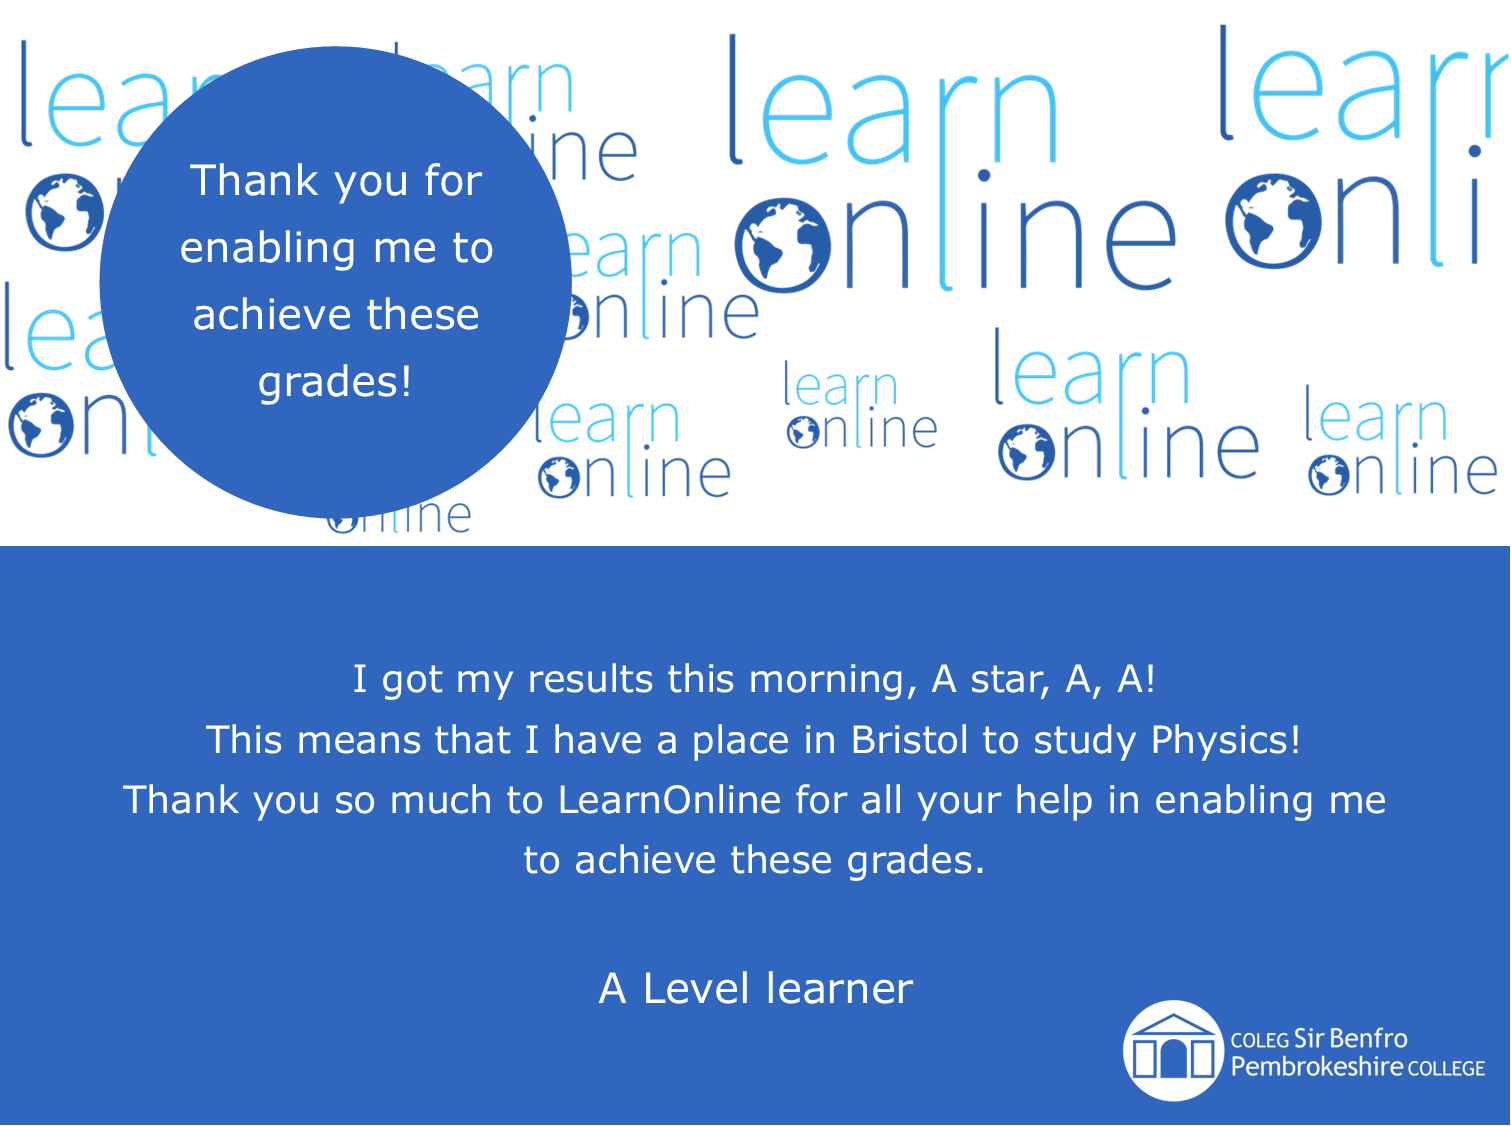 LearnOnline testimonial 'Thank you for enabling me to achieve these grades!' I got my results this morning, A star, A, A! This means that I have a place in Bristol to study Physics! Thank you so much to LearnOnline for all your help in enabling me to achieve these grades. A Level learner